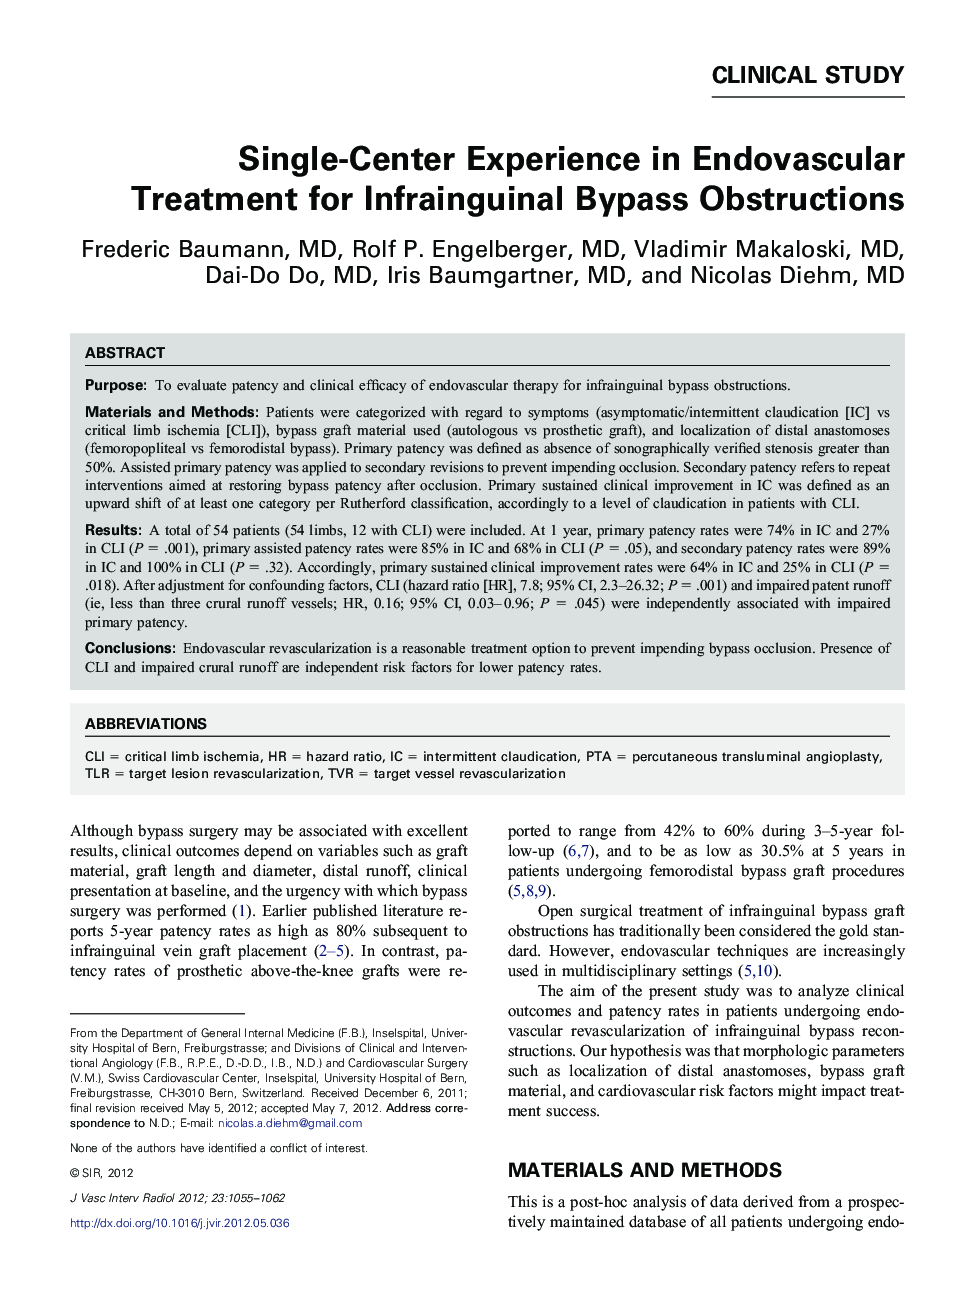 Single-Center Experience in Endovascular Treatment for Infrainguinal Bypass Obstructions